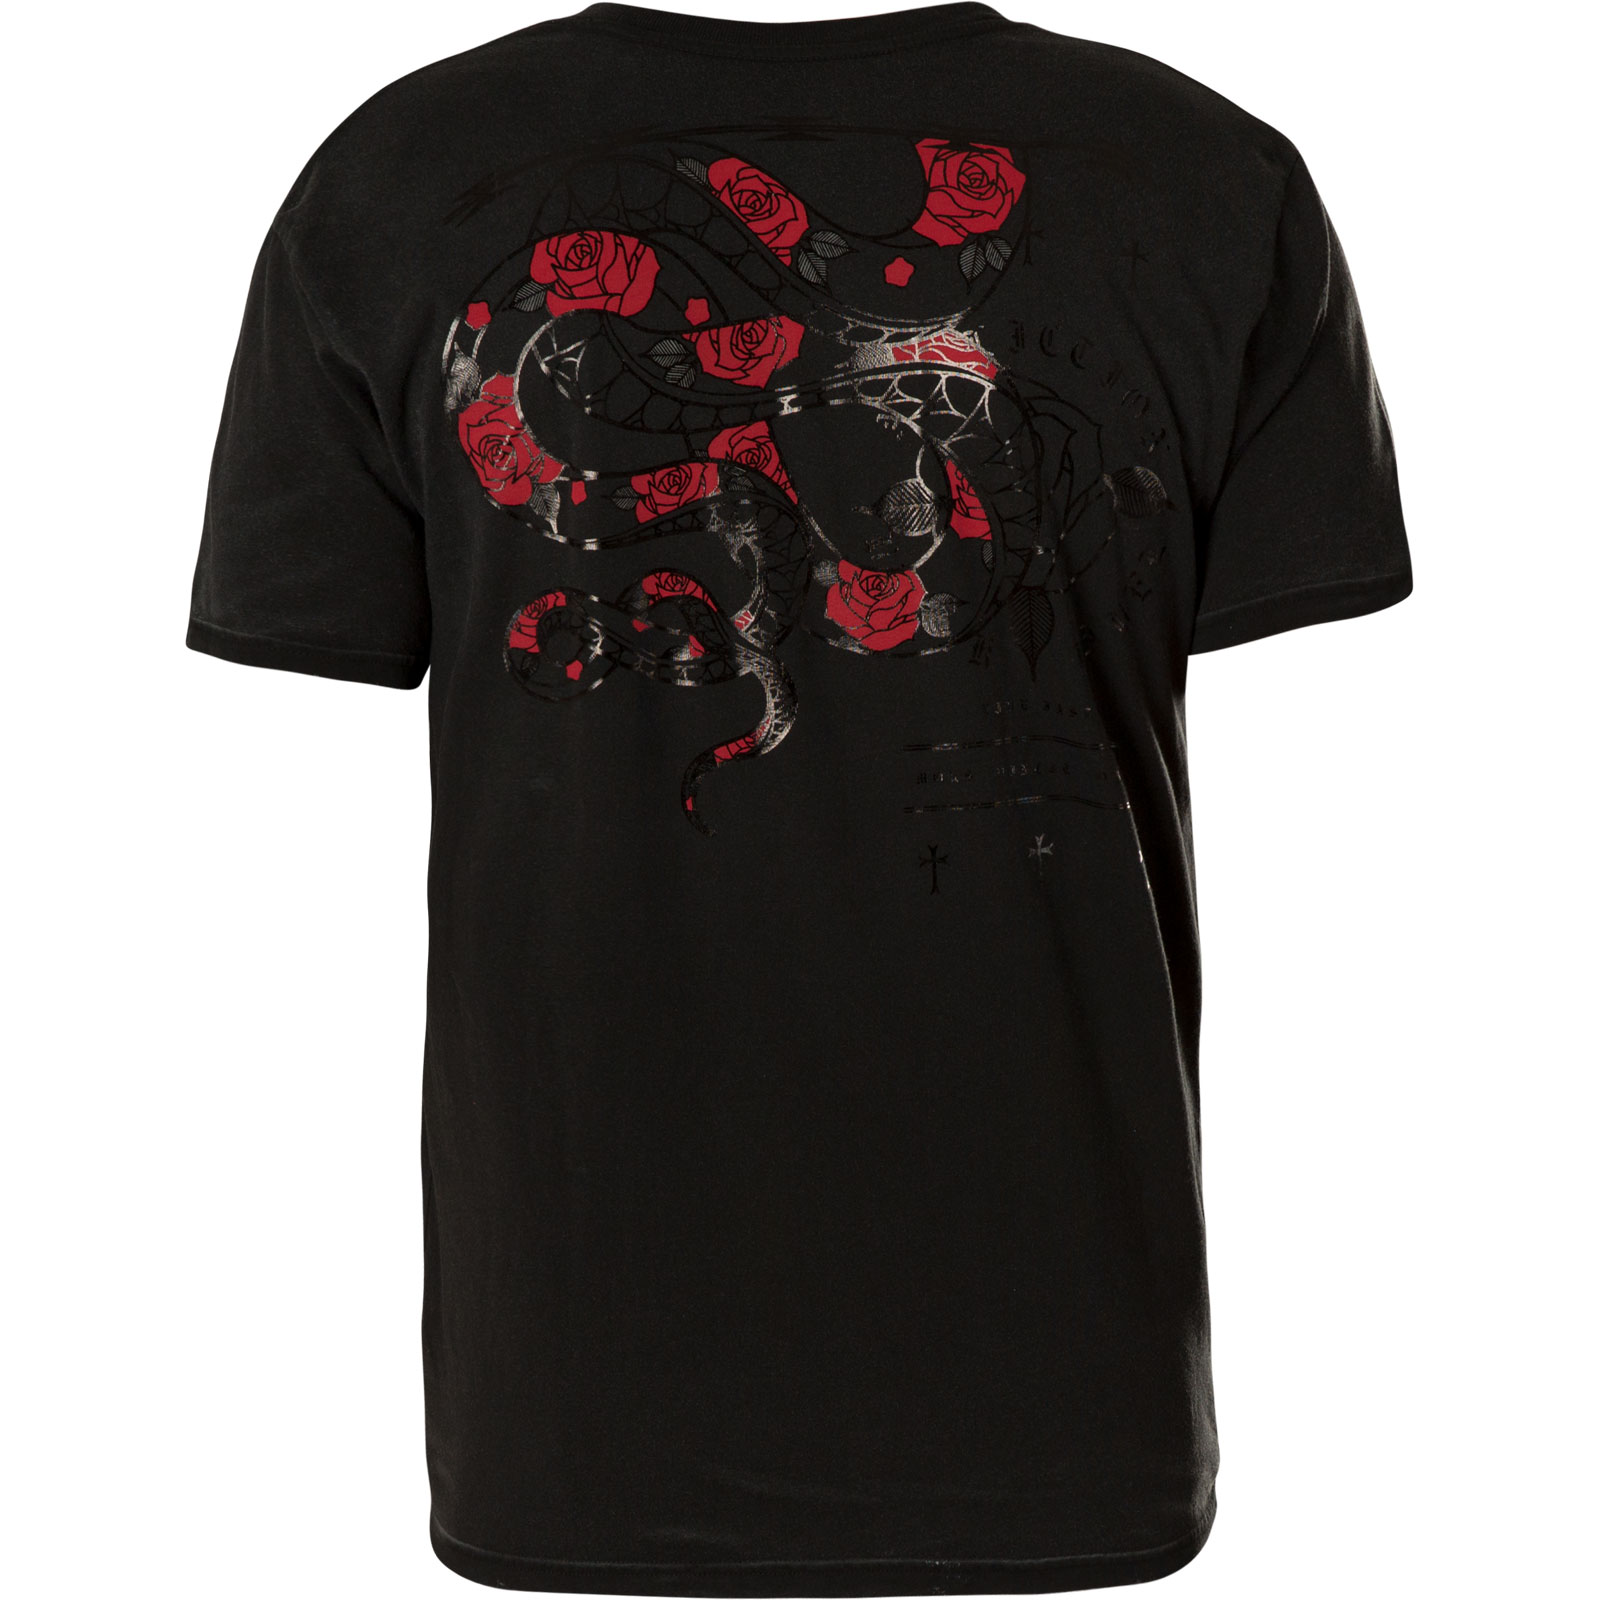 Affliction Venomous T-Shirt featuring a snake and roses